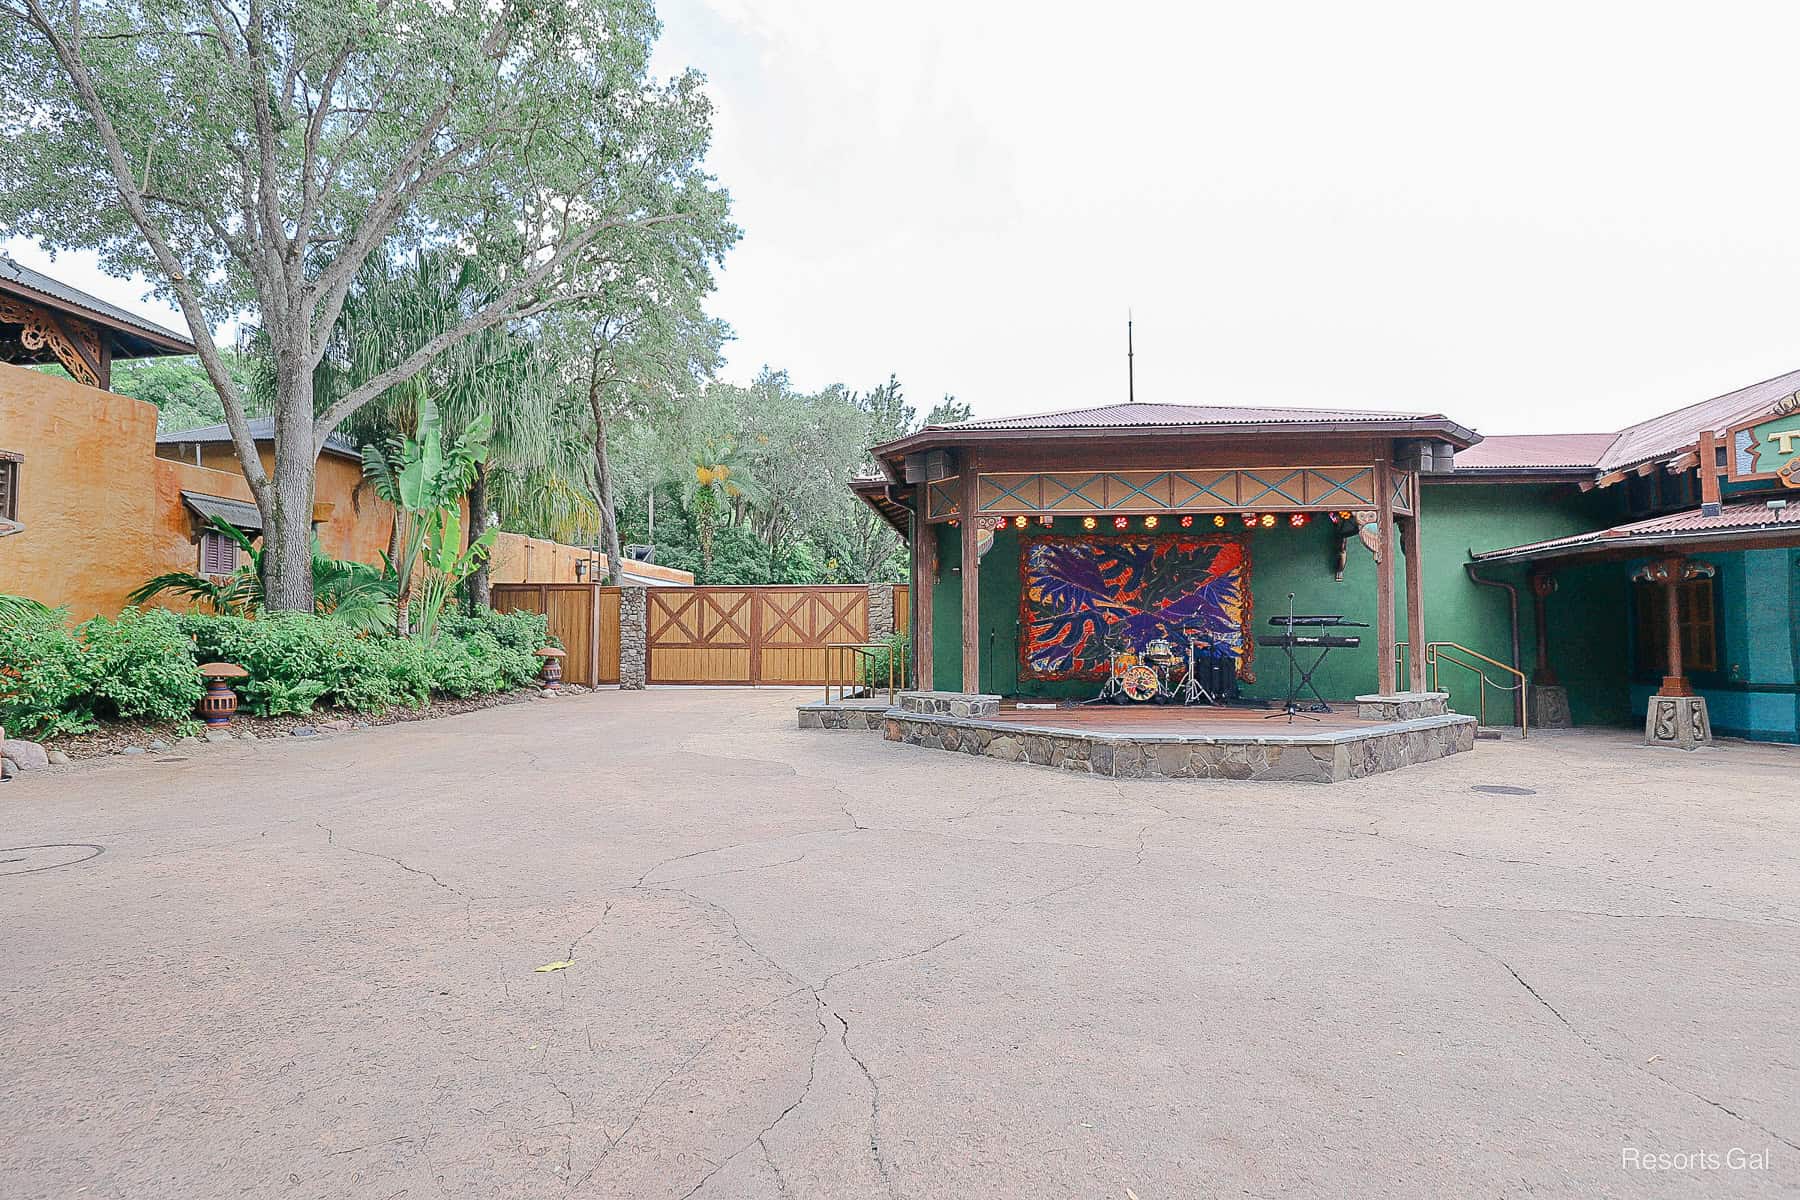 the stage where Dug enters the park for his character meet-and-greet